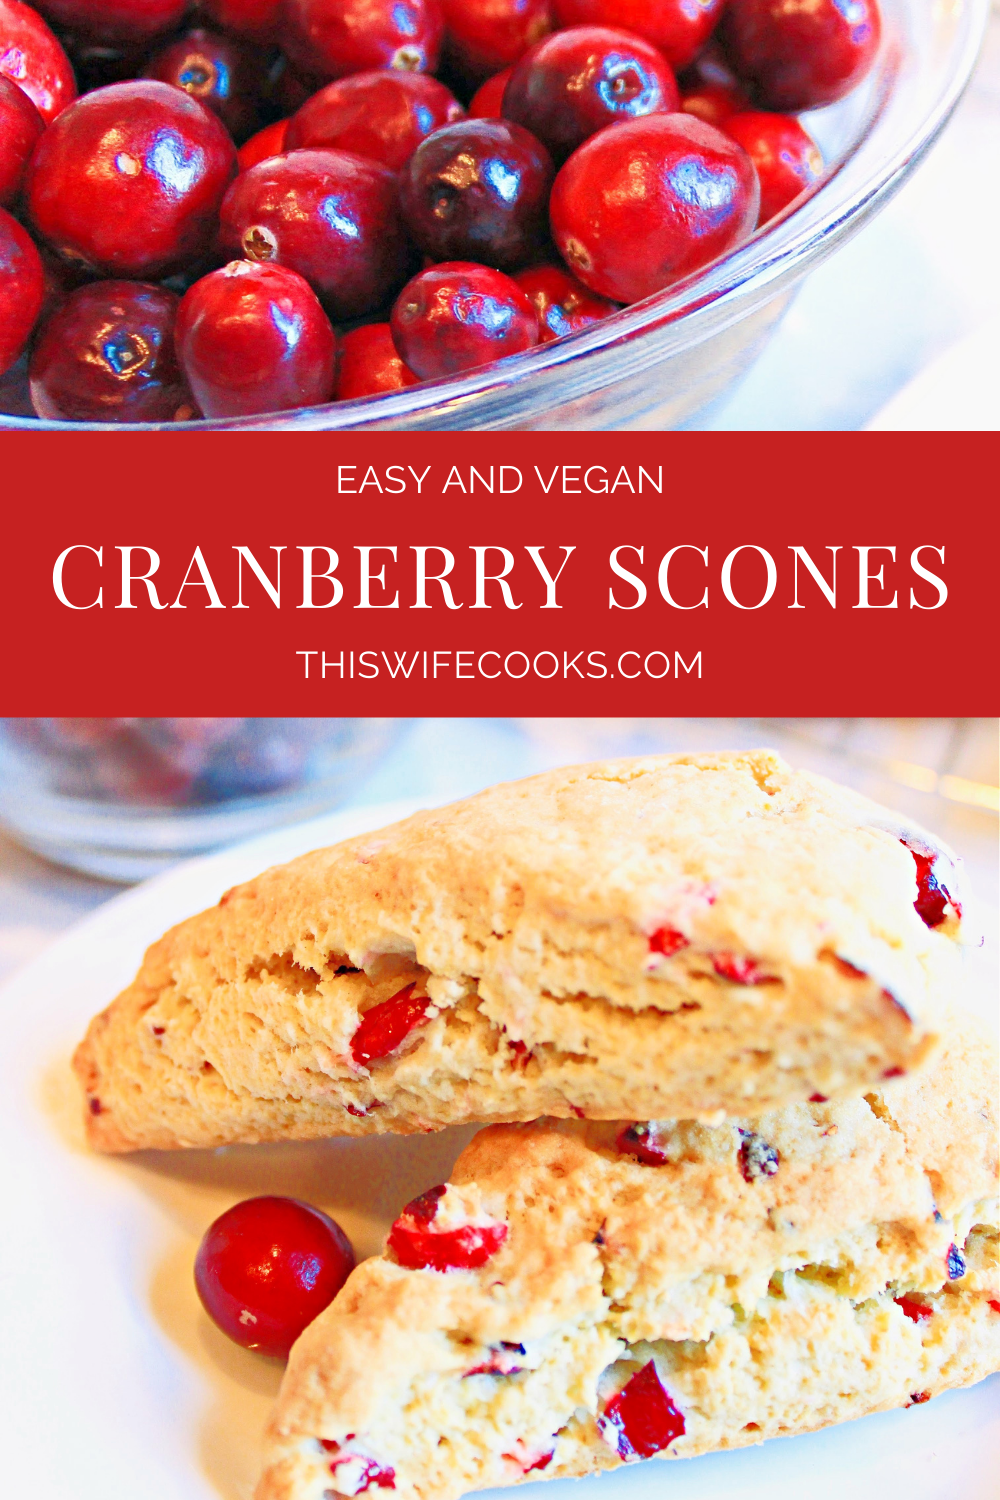 To turn these into Cranberry-Orange scones:

Add a little citrusy flair by stirring in 2 teaspoons orange zest along with the cranberries.

Want to add a glaze?

Stir together 1/2 cup + 2 tablespoons powdered sugar and 1 tablespoon orange juice.

Drizzle over baked scones and allow glaze to dry before serving. via @thiswifecooks